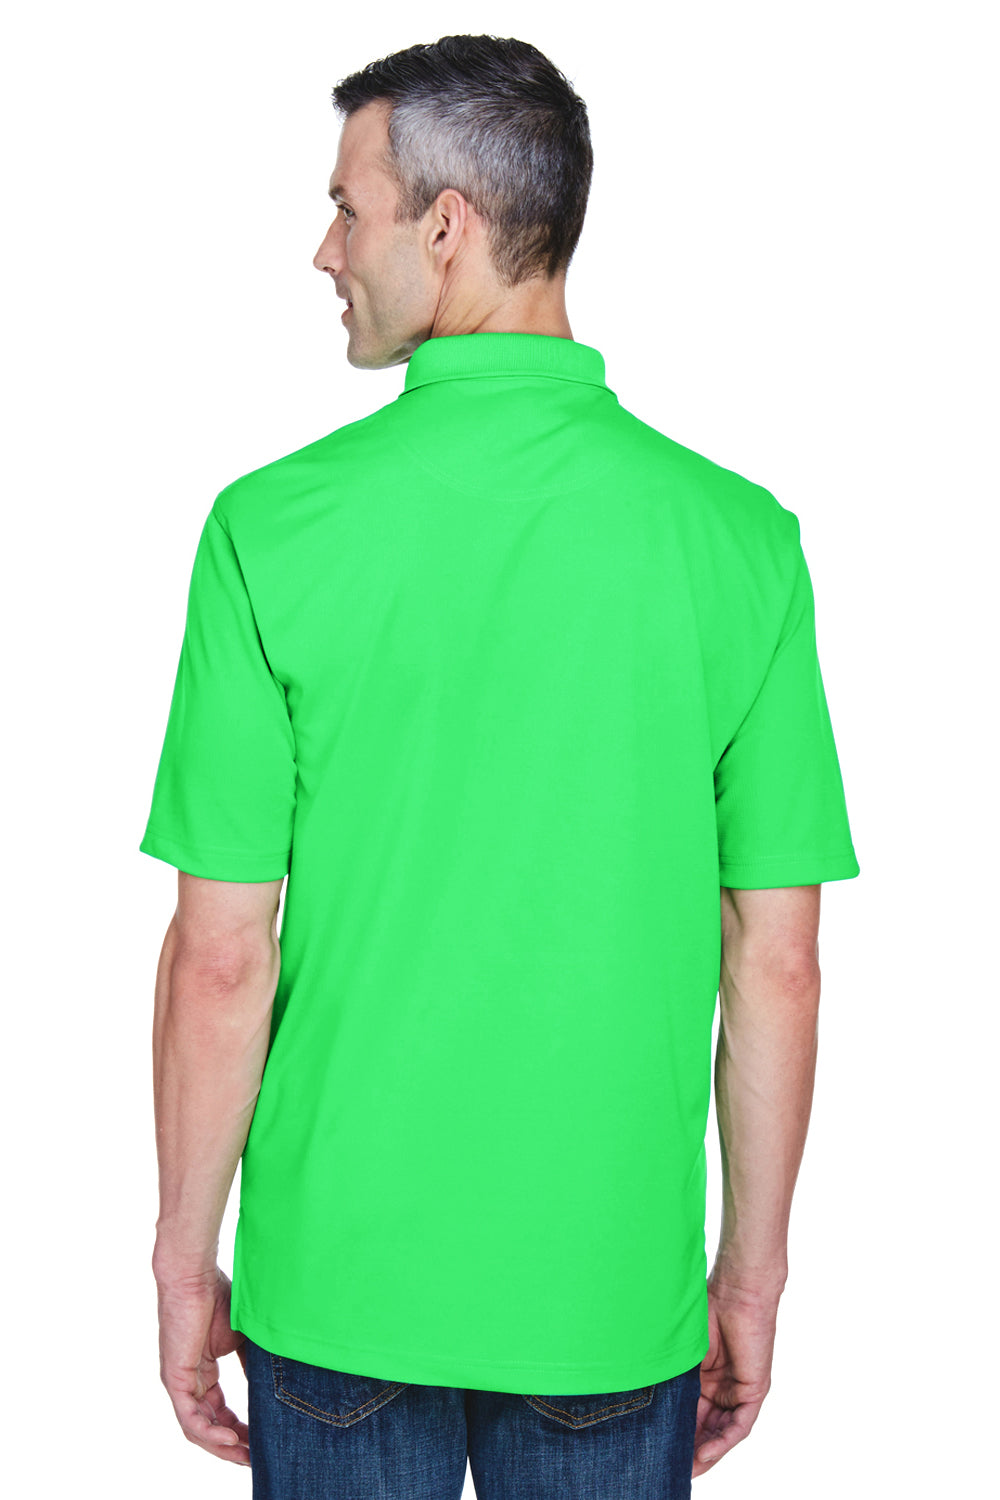 UltraClub 8445 Mens Cool & Dry Performance Moisture Wicking Short Sleeve Polo Shirt Cool Green Back